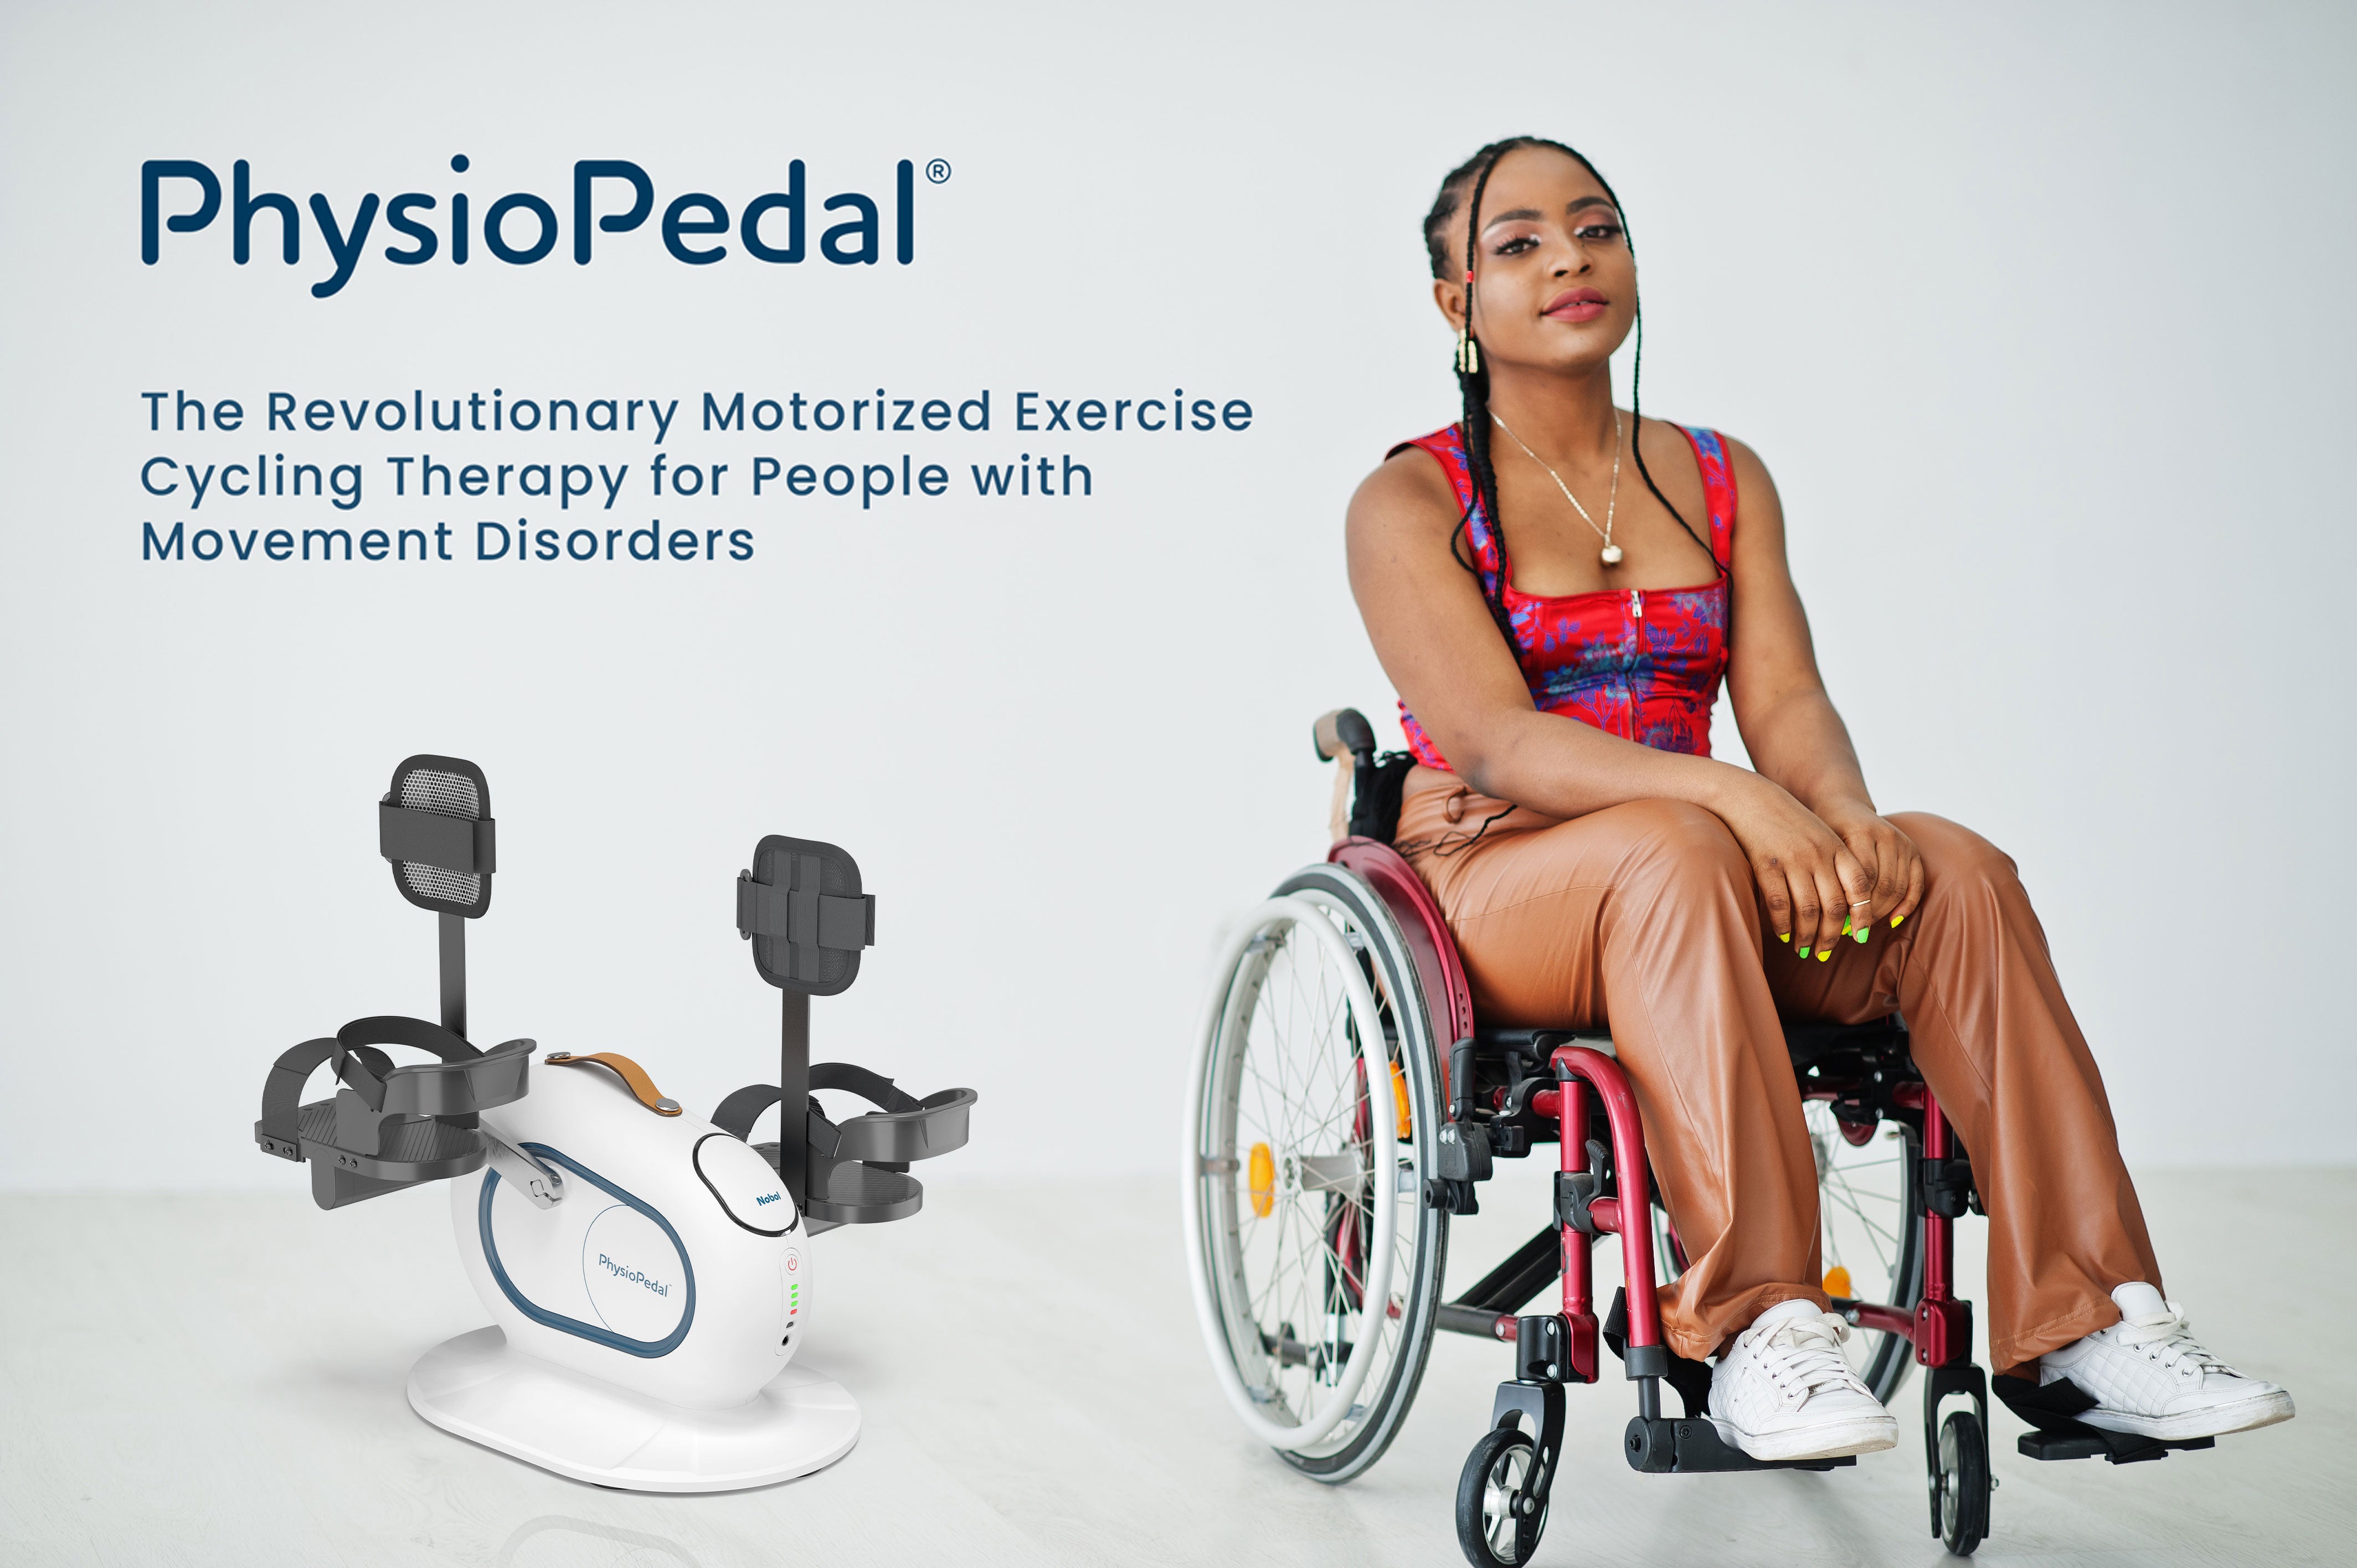 PHYSIOPEDAL: The Revolutionary Motorized Exercise Cycling Therapy for Patients with Movement Disorders